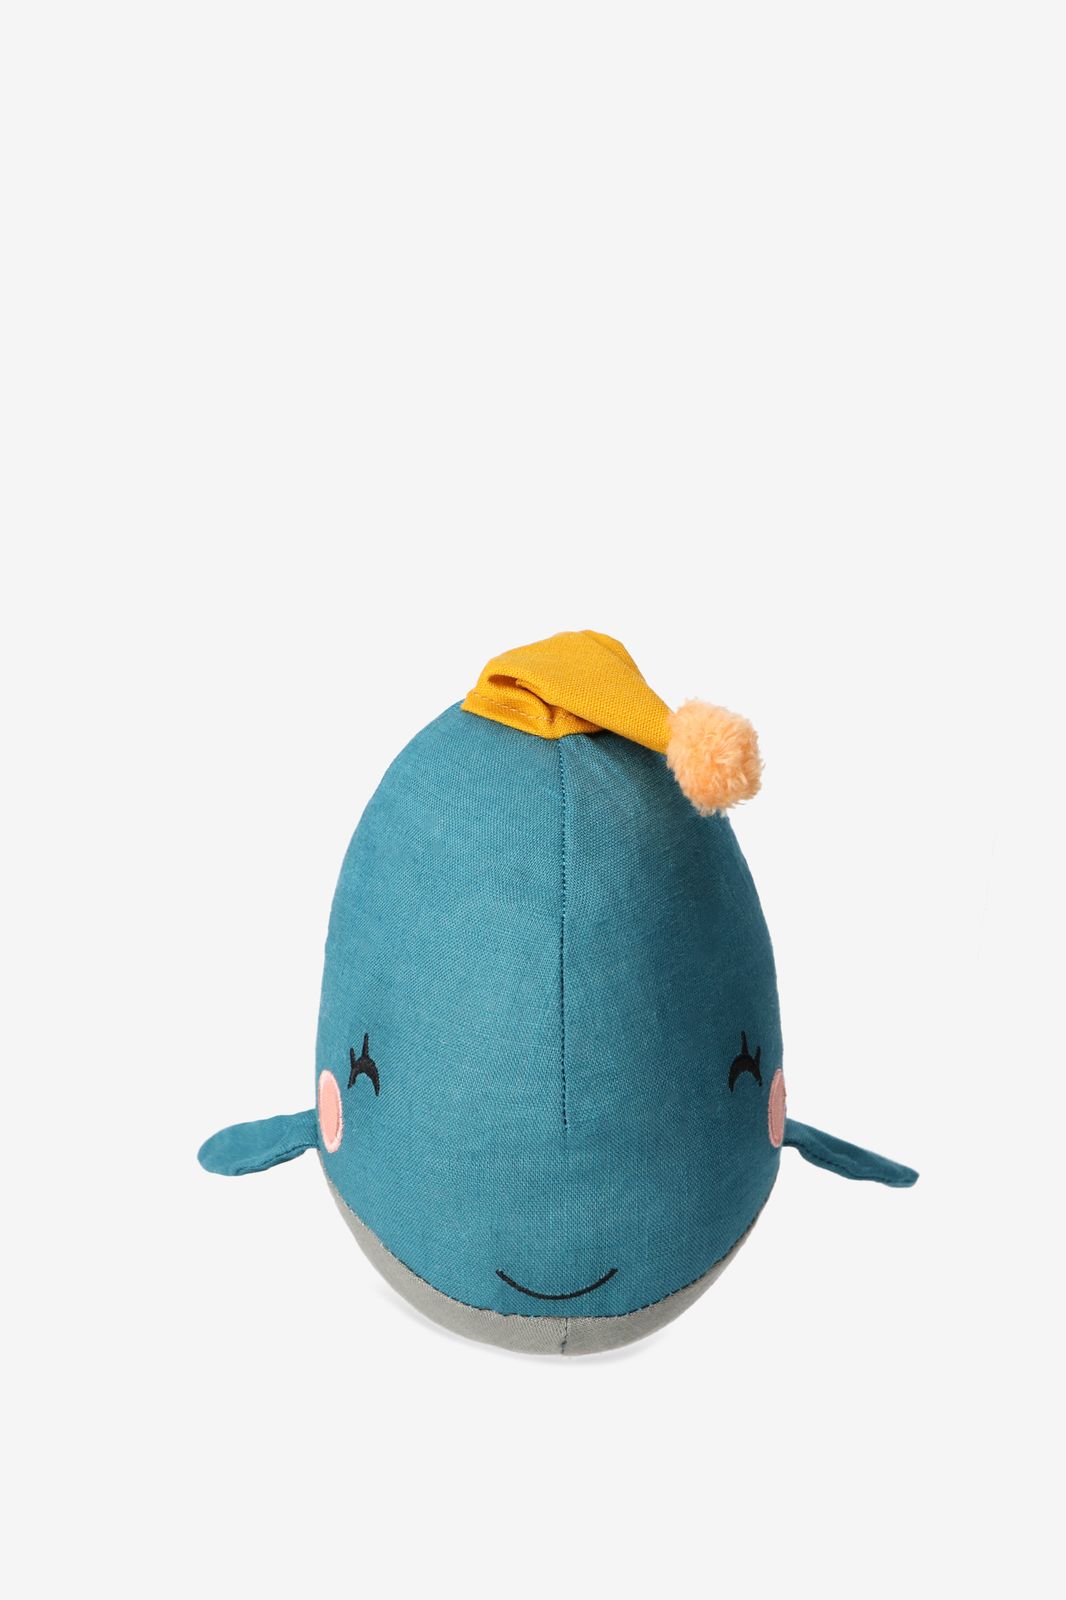 Pica Loulou Peluche baleine